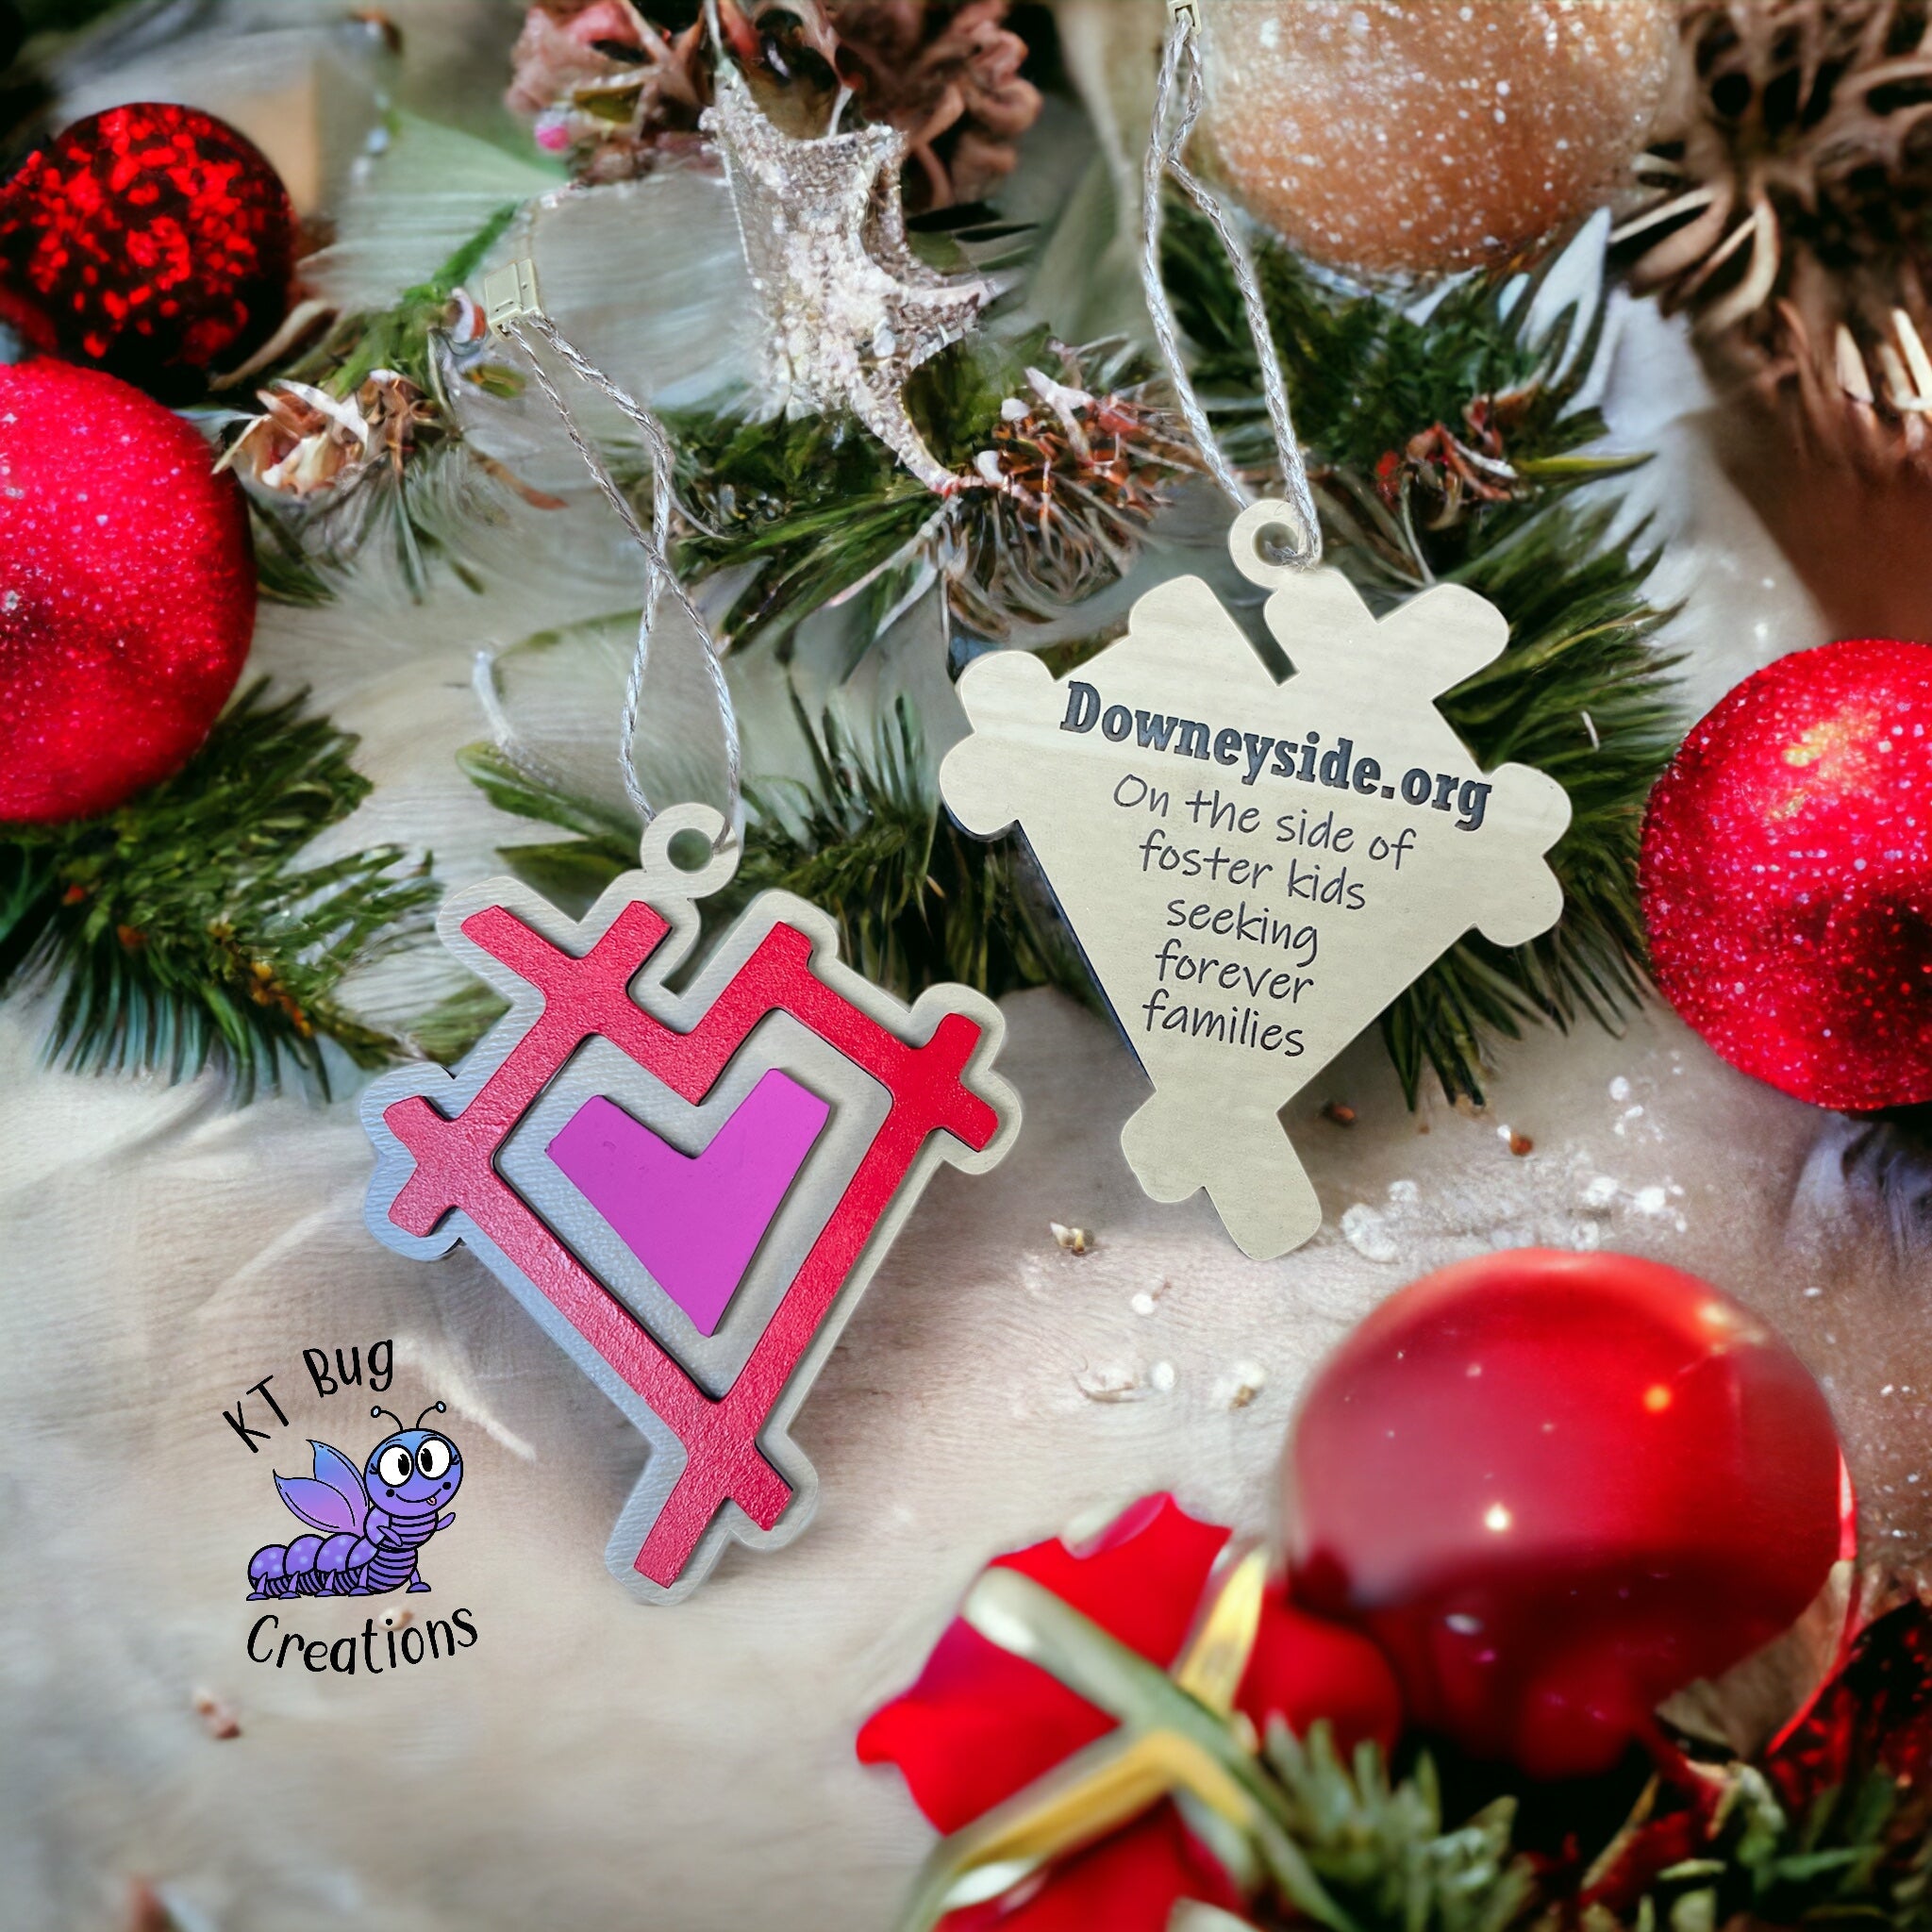 (Wholesale) Downey Side Adoption Agency Fundraiser Ornament